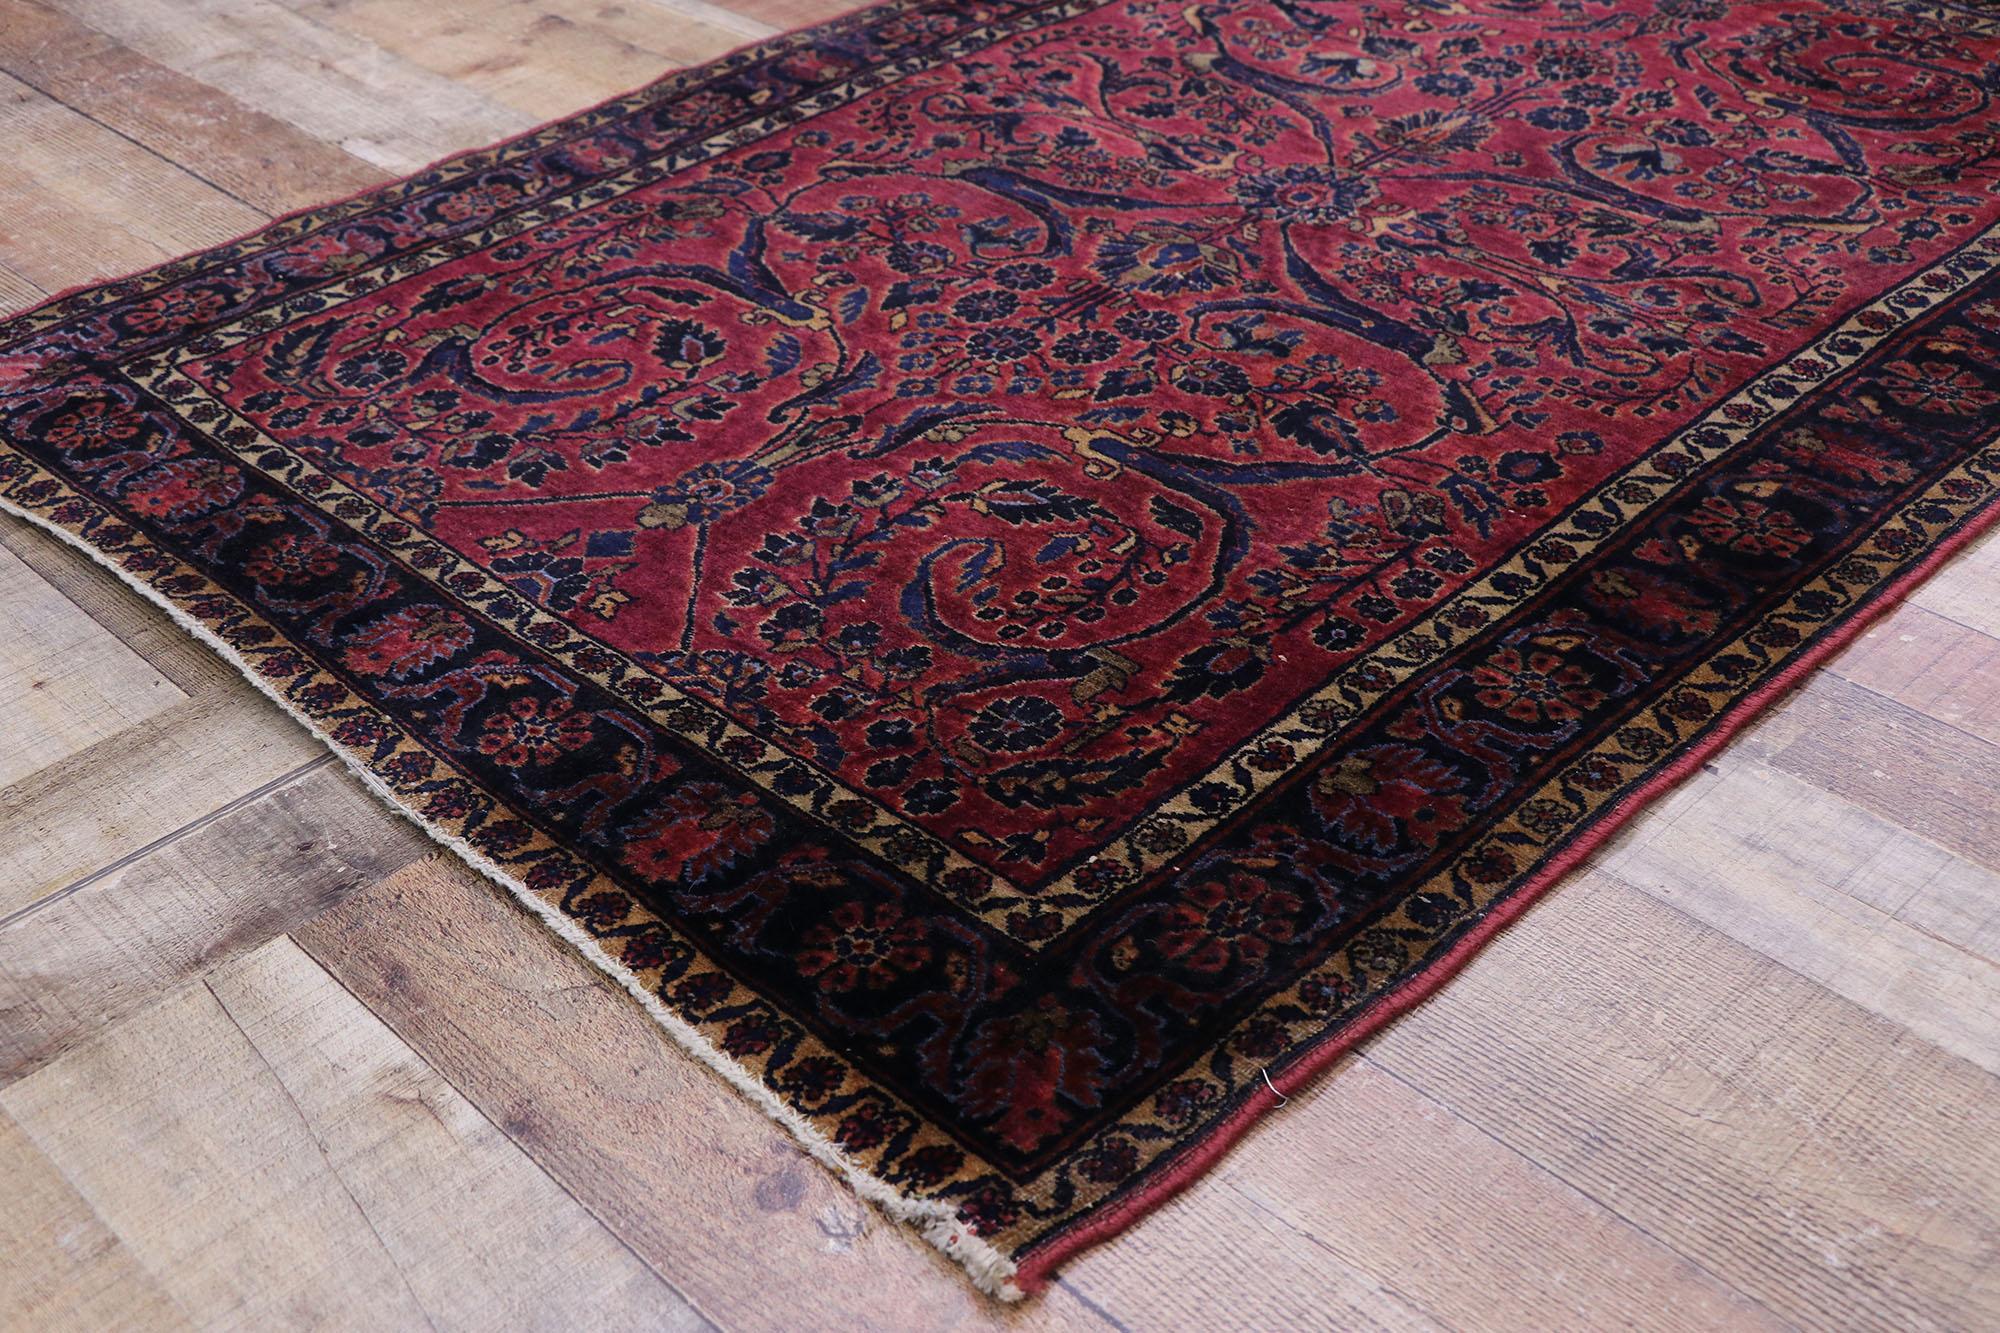 20th Century Antique Persian Sarouk Rug with Old World Victorian Style For Sale